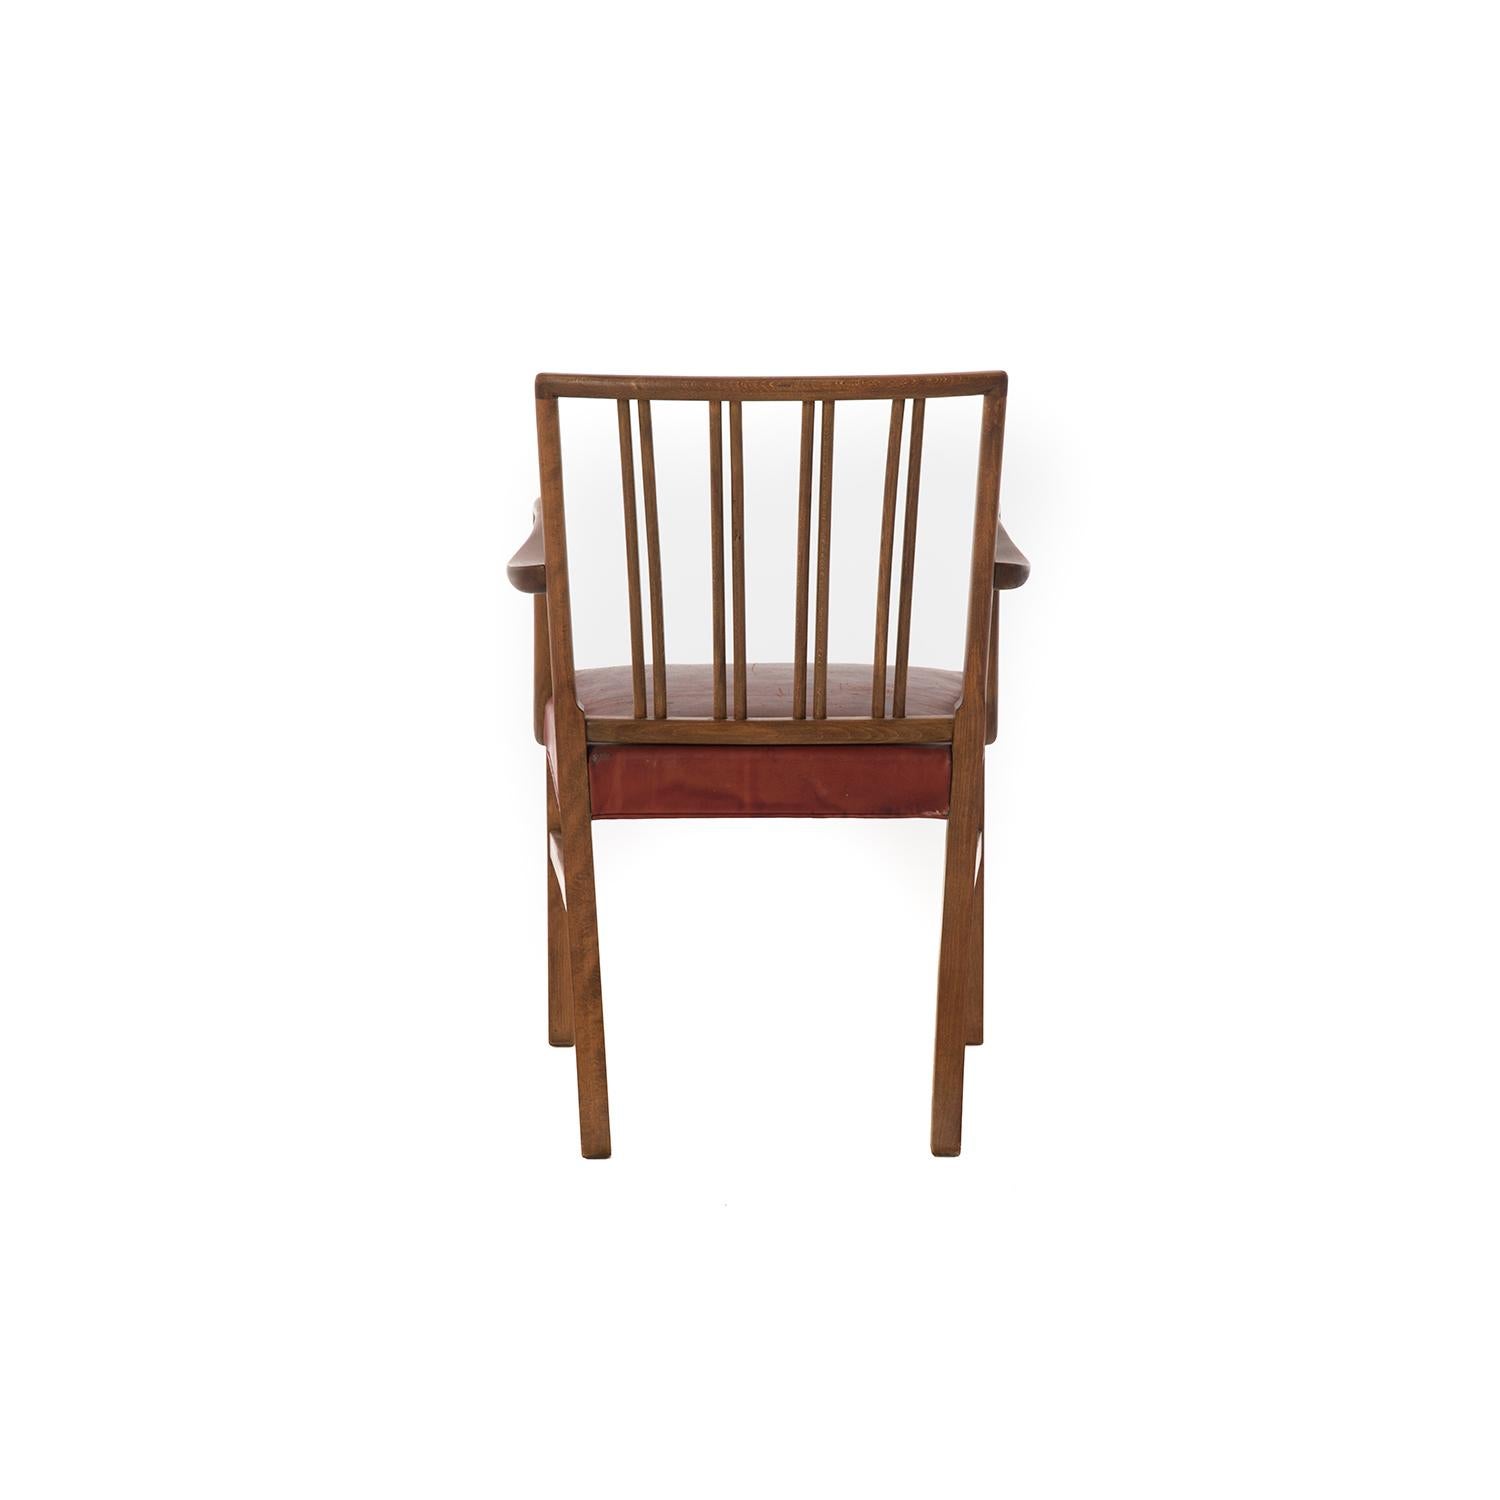 Lacquered Transitional Danish Modern Occasional Chair by Ole Wanscher